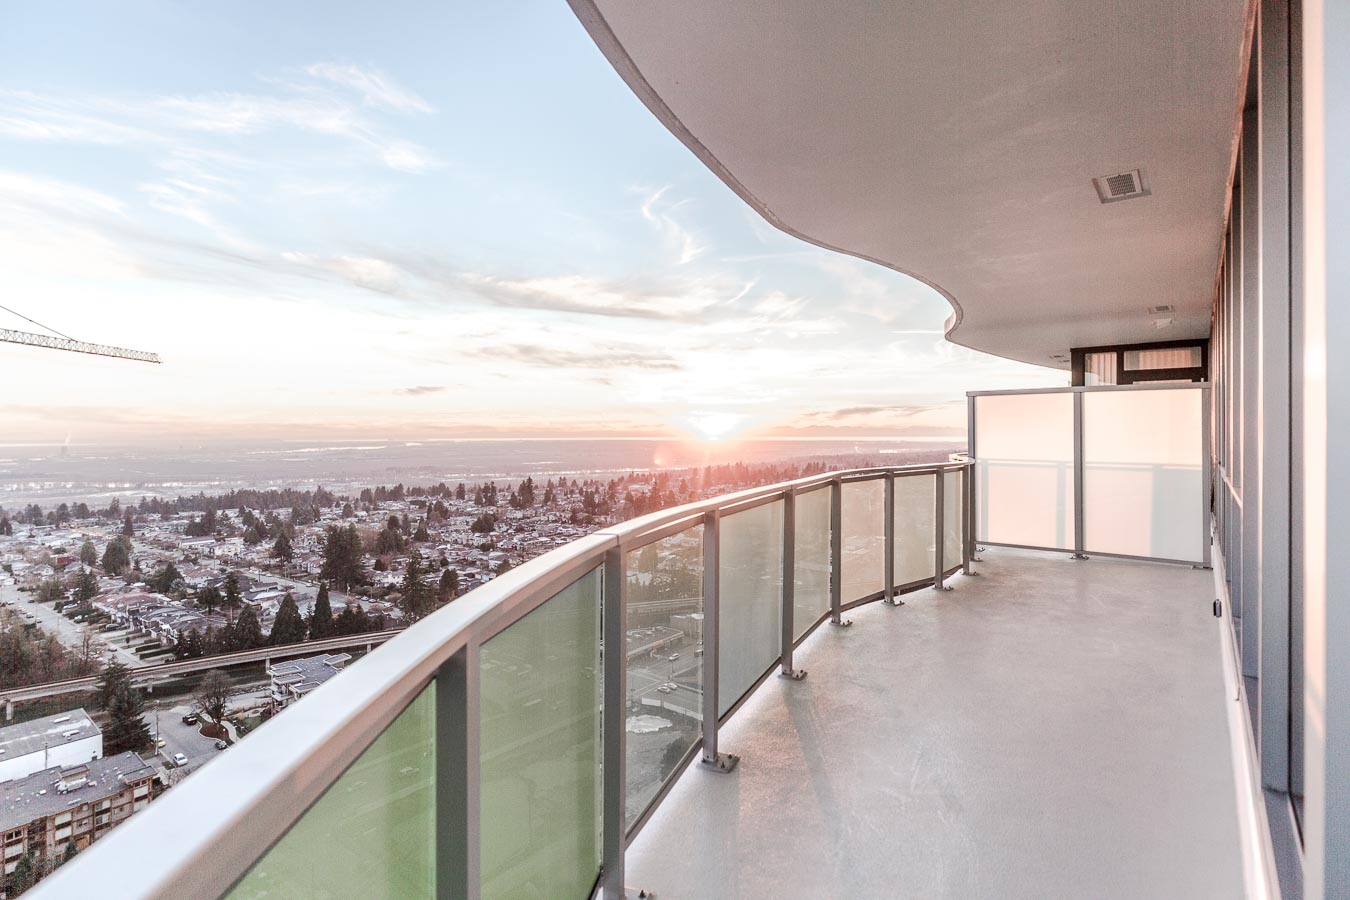 Balcony with panoramic views at newly developed Metrotown condo.